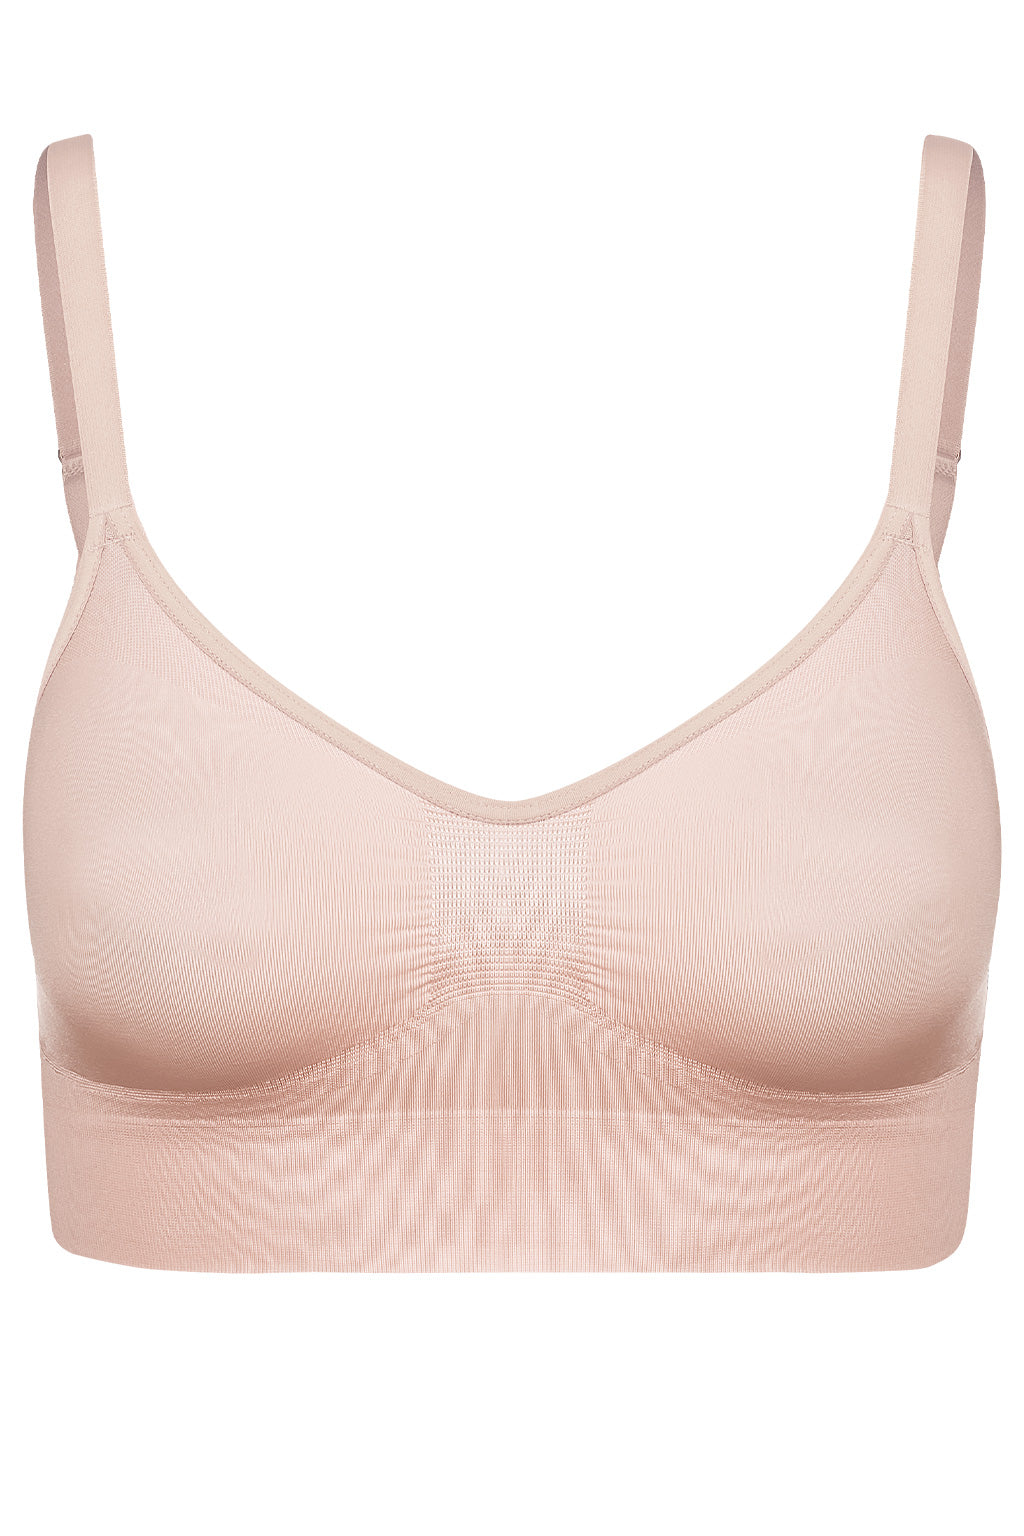 Plie Australia - What's special about our Control Soft Skin Bra